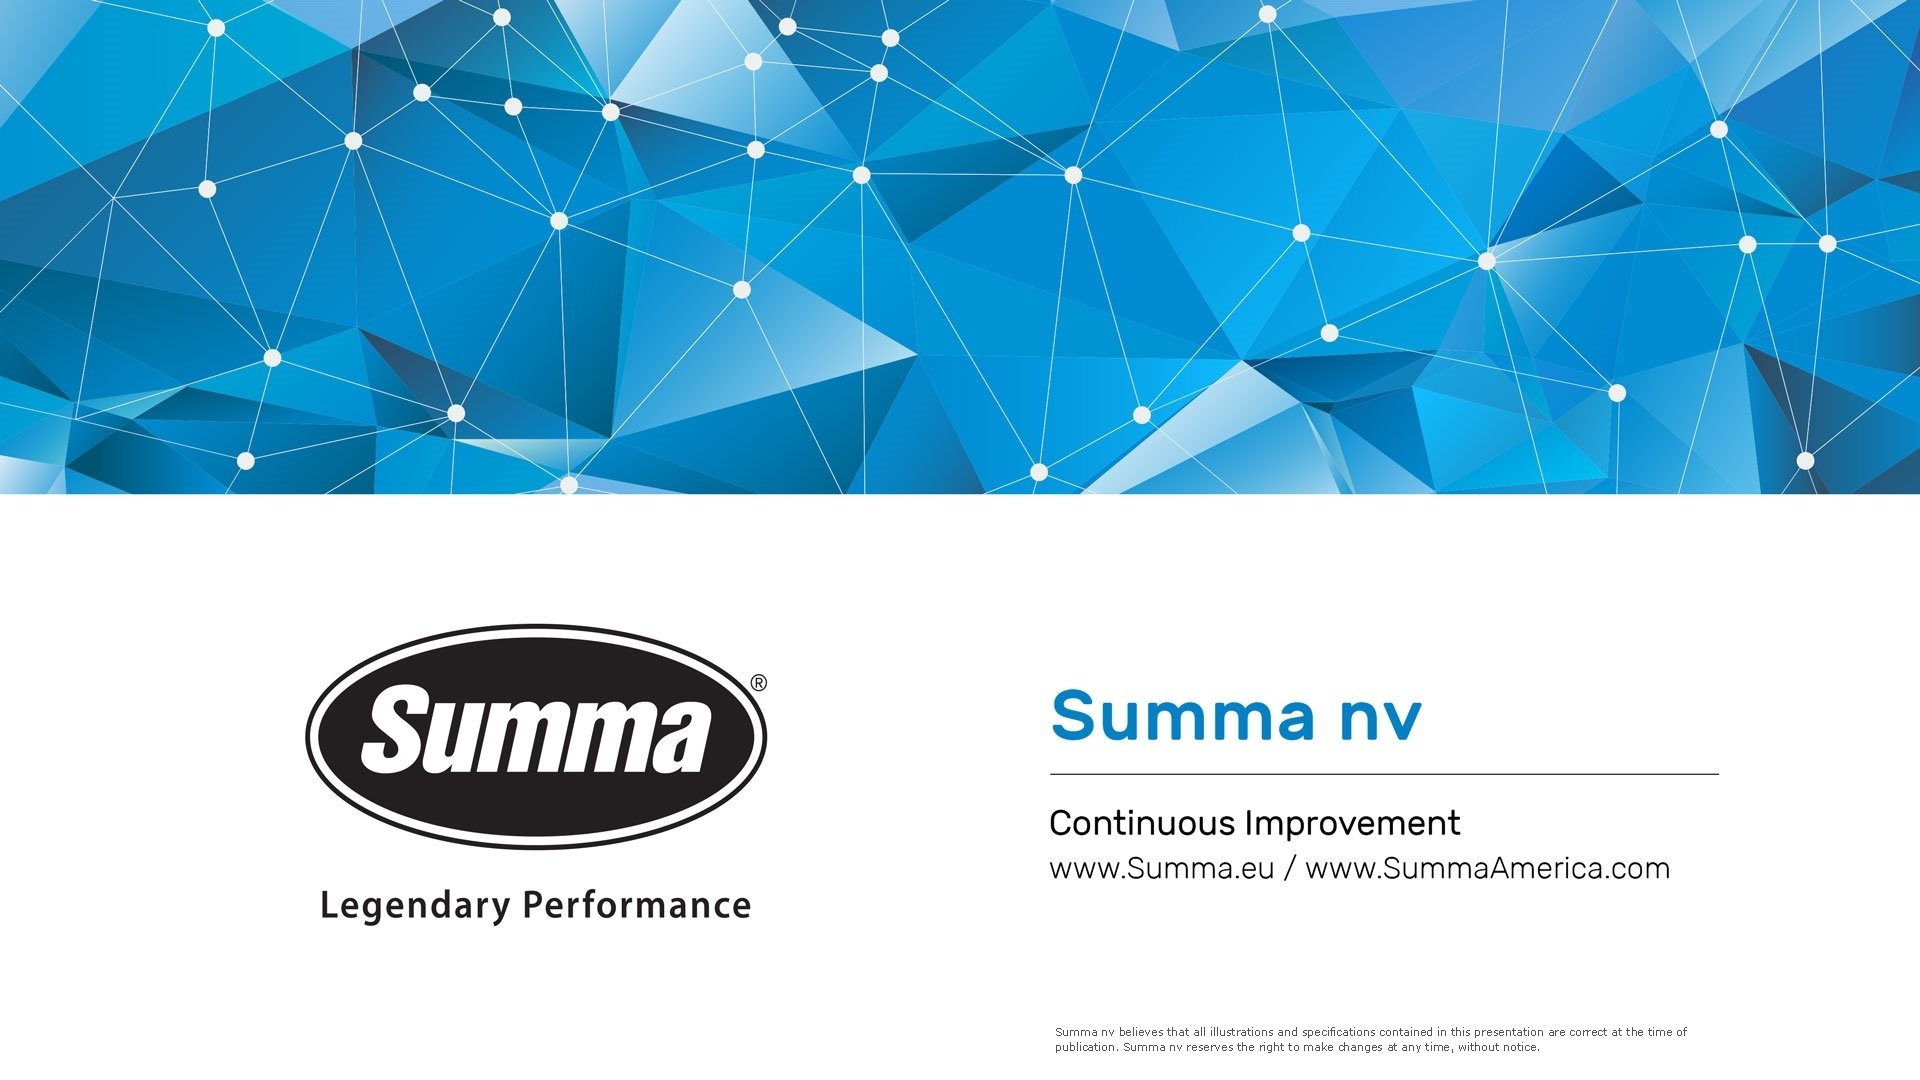 Summa nv believes that all illustrations and specifications contained in this presentation are correct